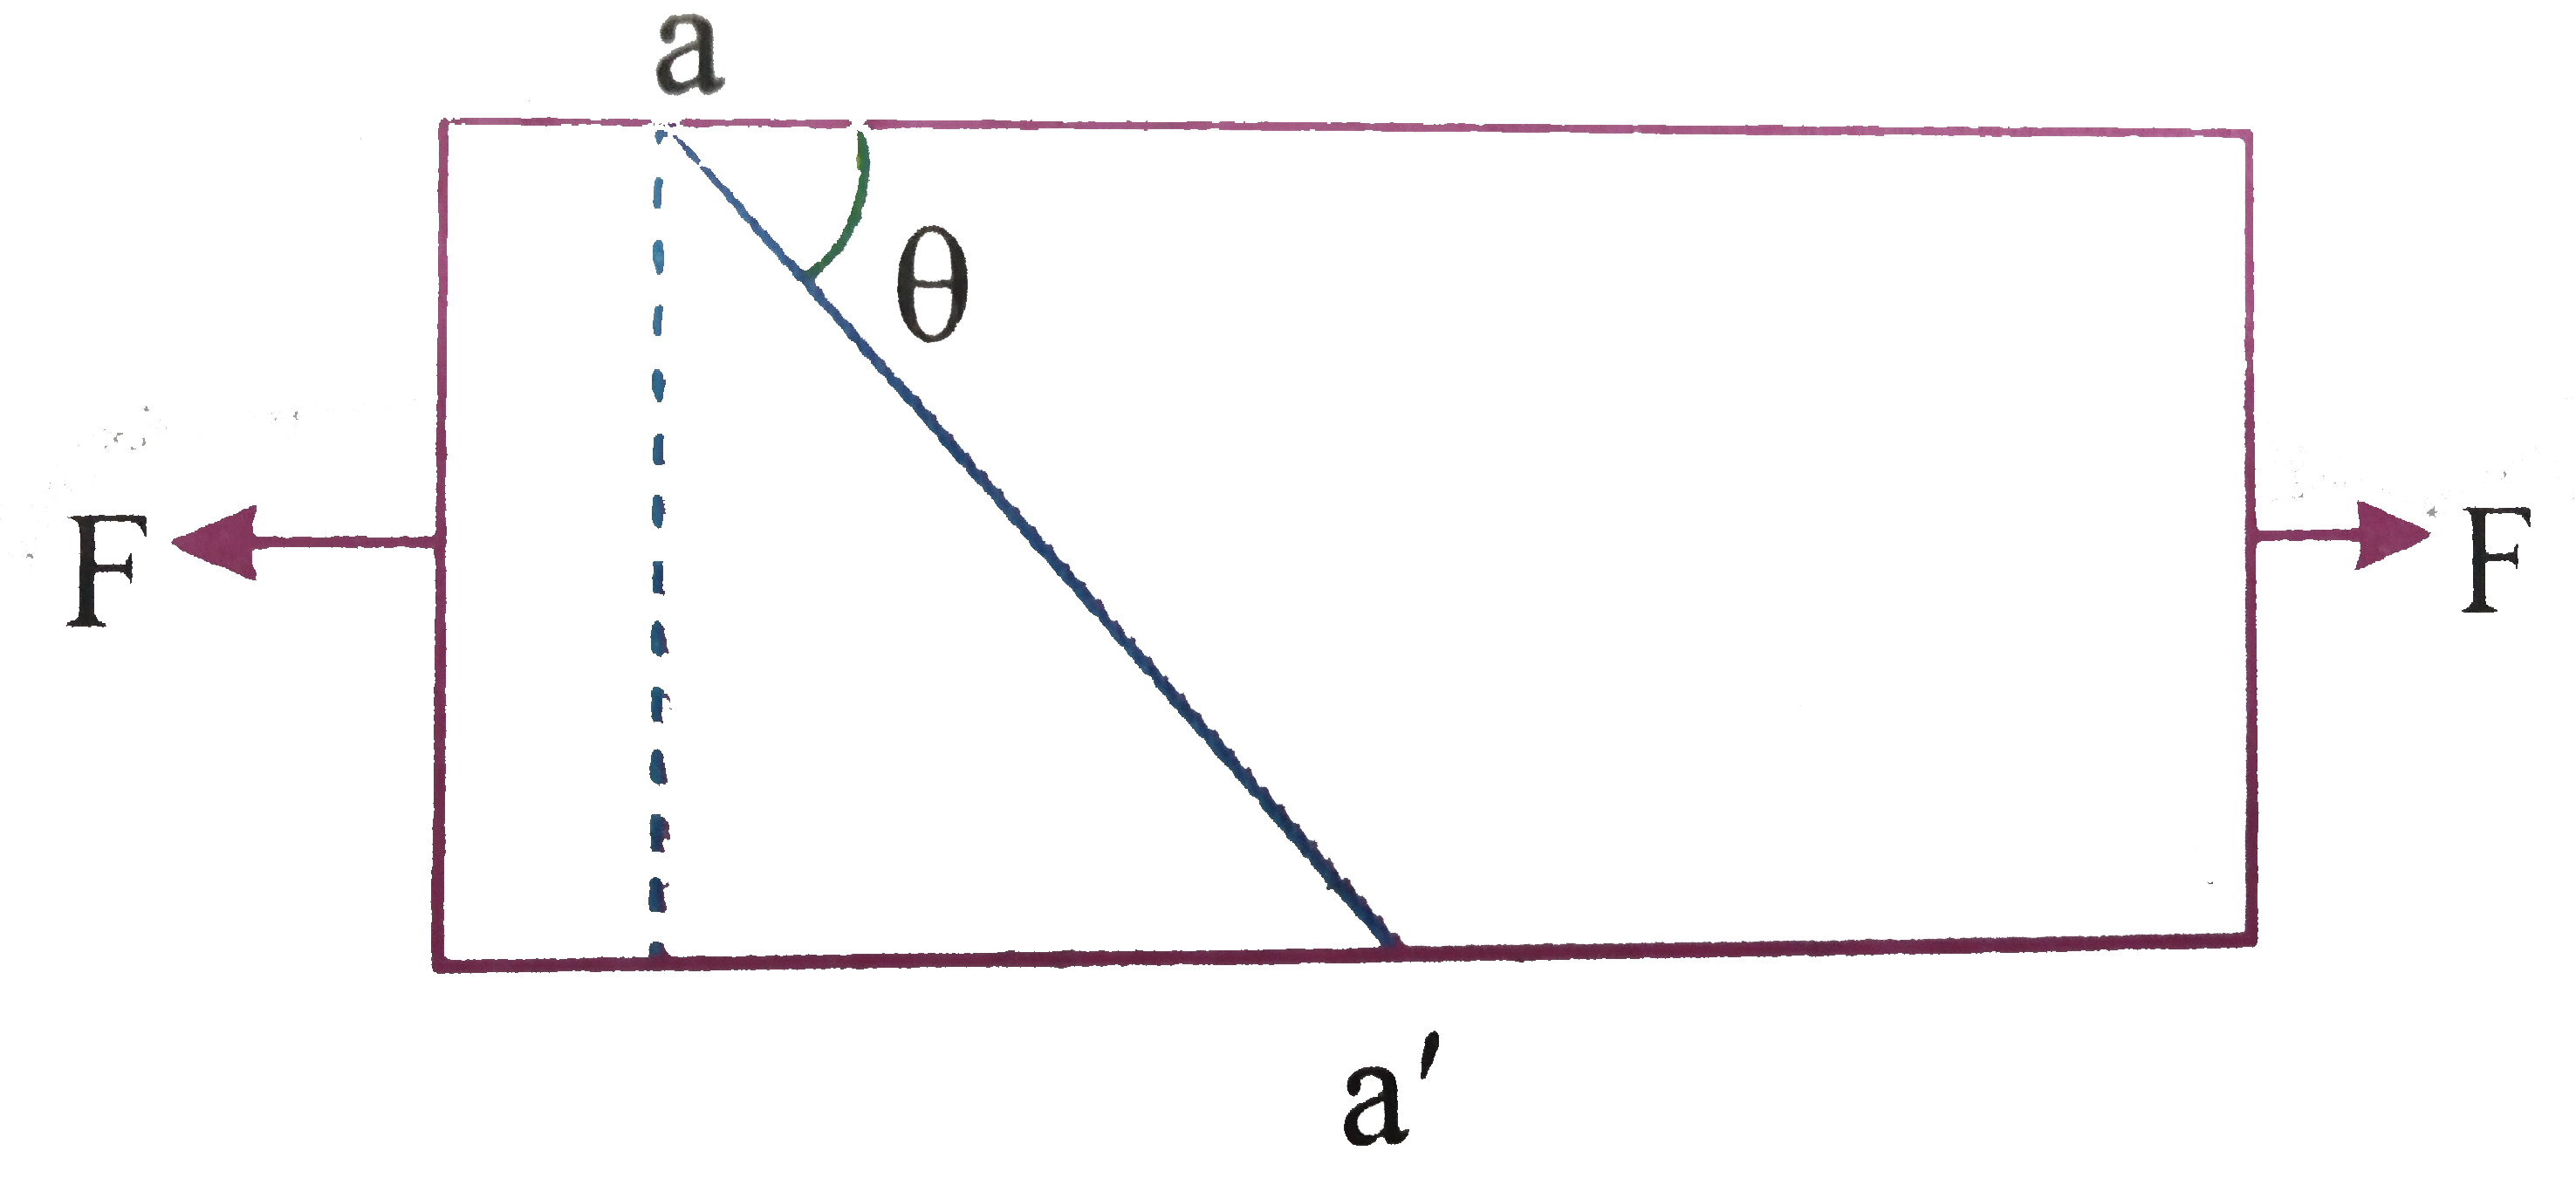 Consider a long steel bar under a tensille due to force F acting  at the edges  along the length of the bar  (figure). Consider a plane making an angle theta with the length. For what angle is  the tensile stress a maximum?